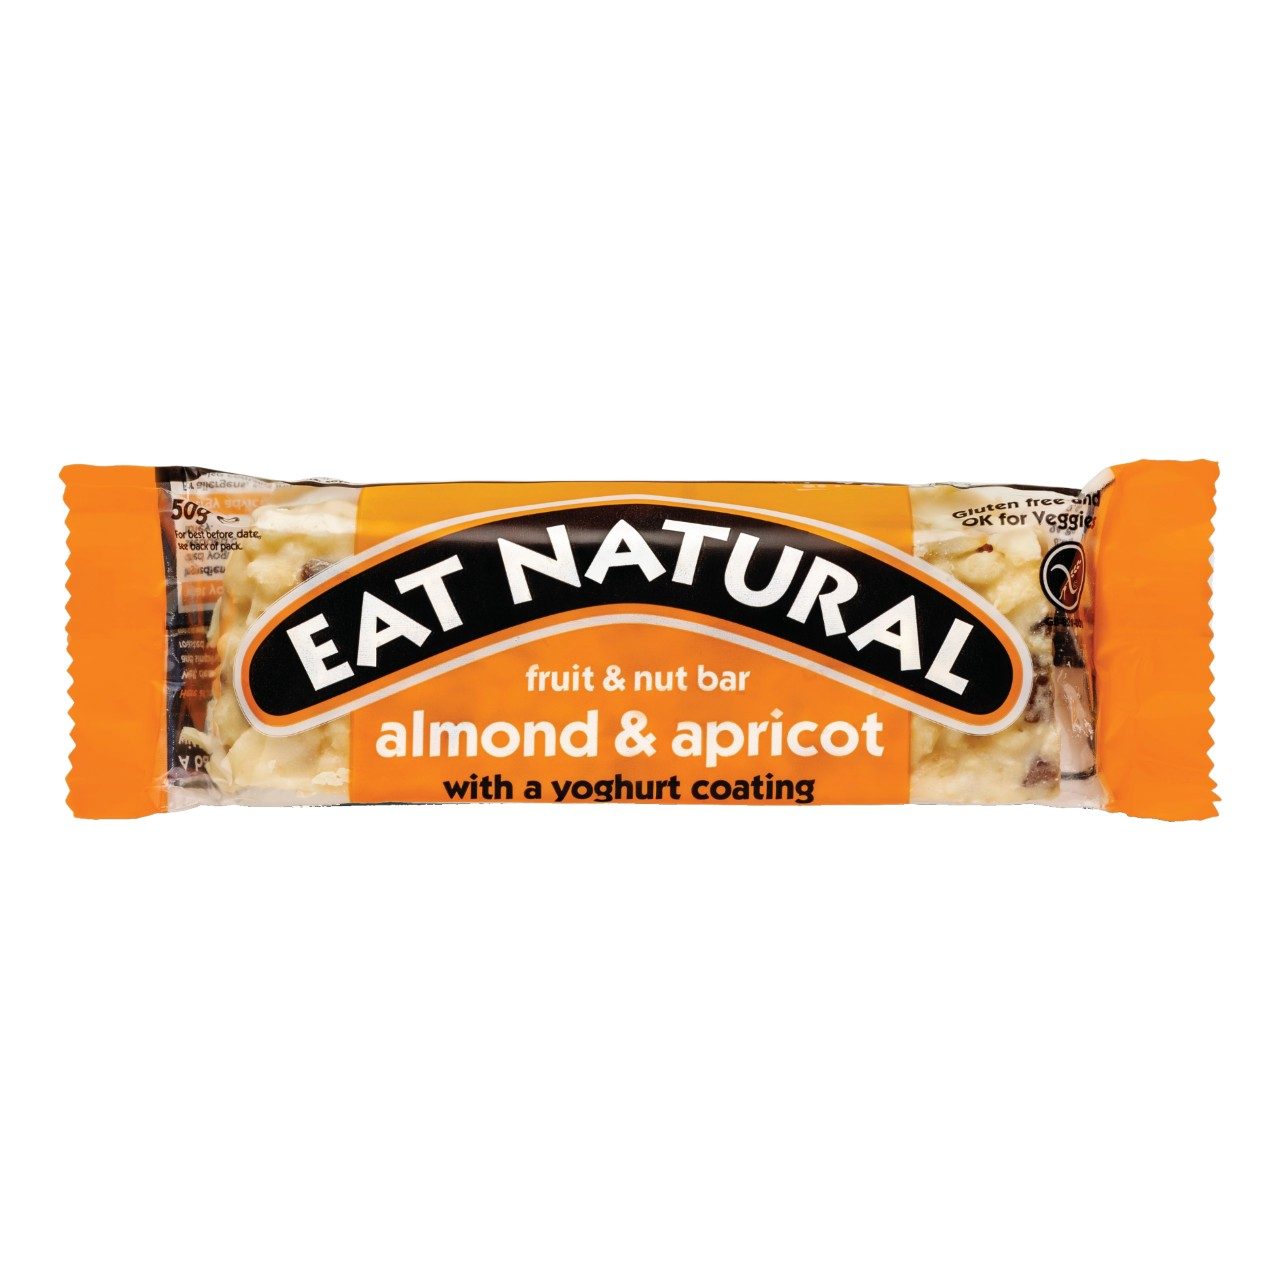 Fruit  nut bars almond  apricot with a yoghurt coating